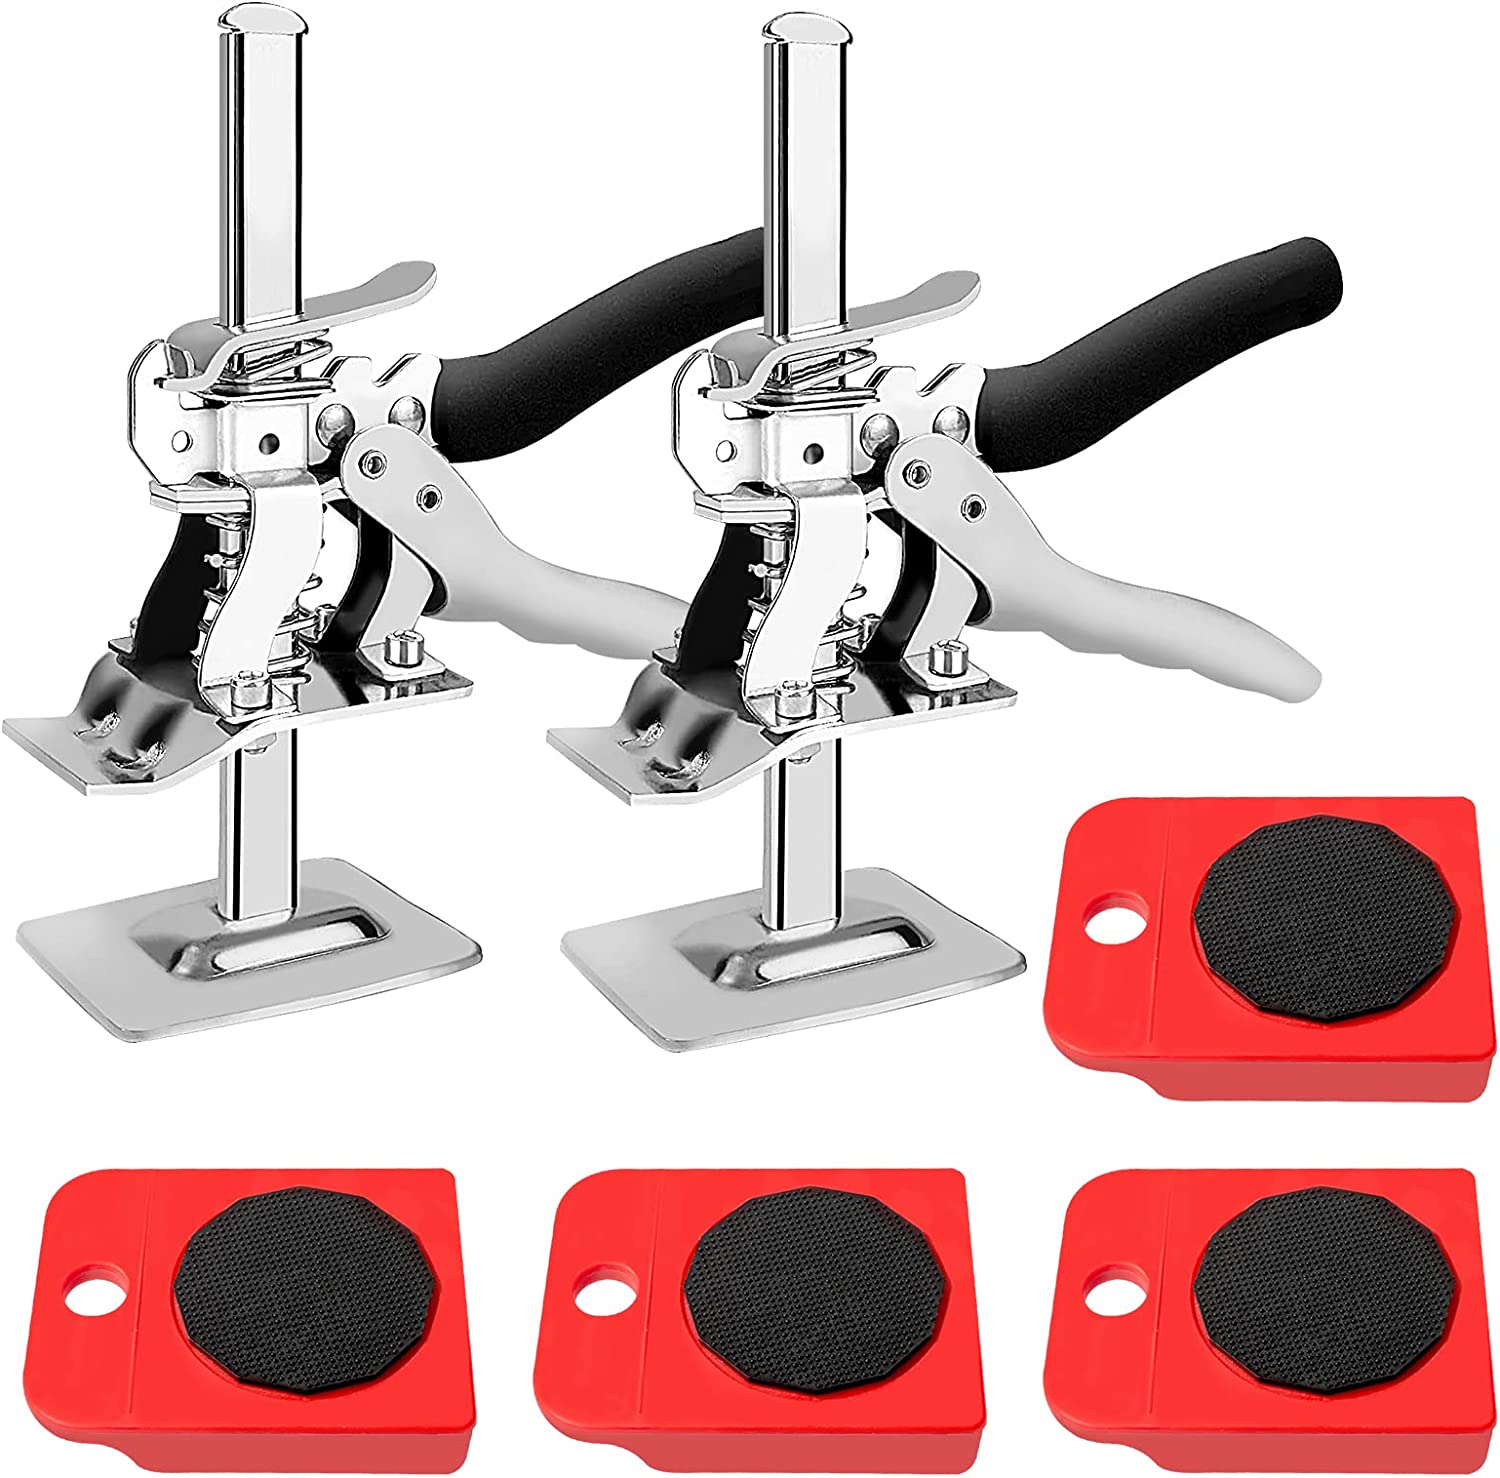 Heavy Duty Furniture Lifter Appliance Moving and Lifting System Adjustable  Height Lifting Tool for Easy Safe